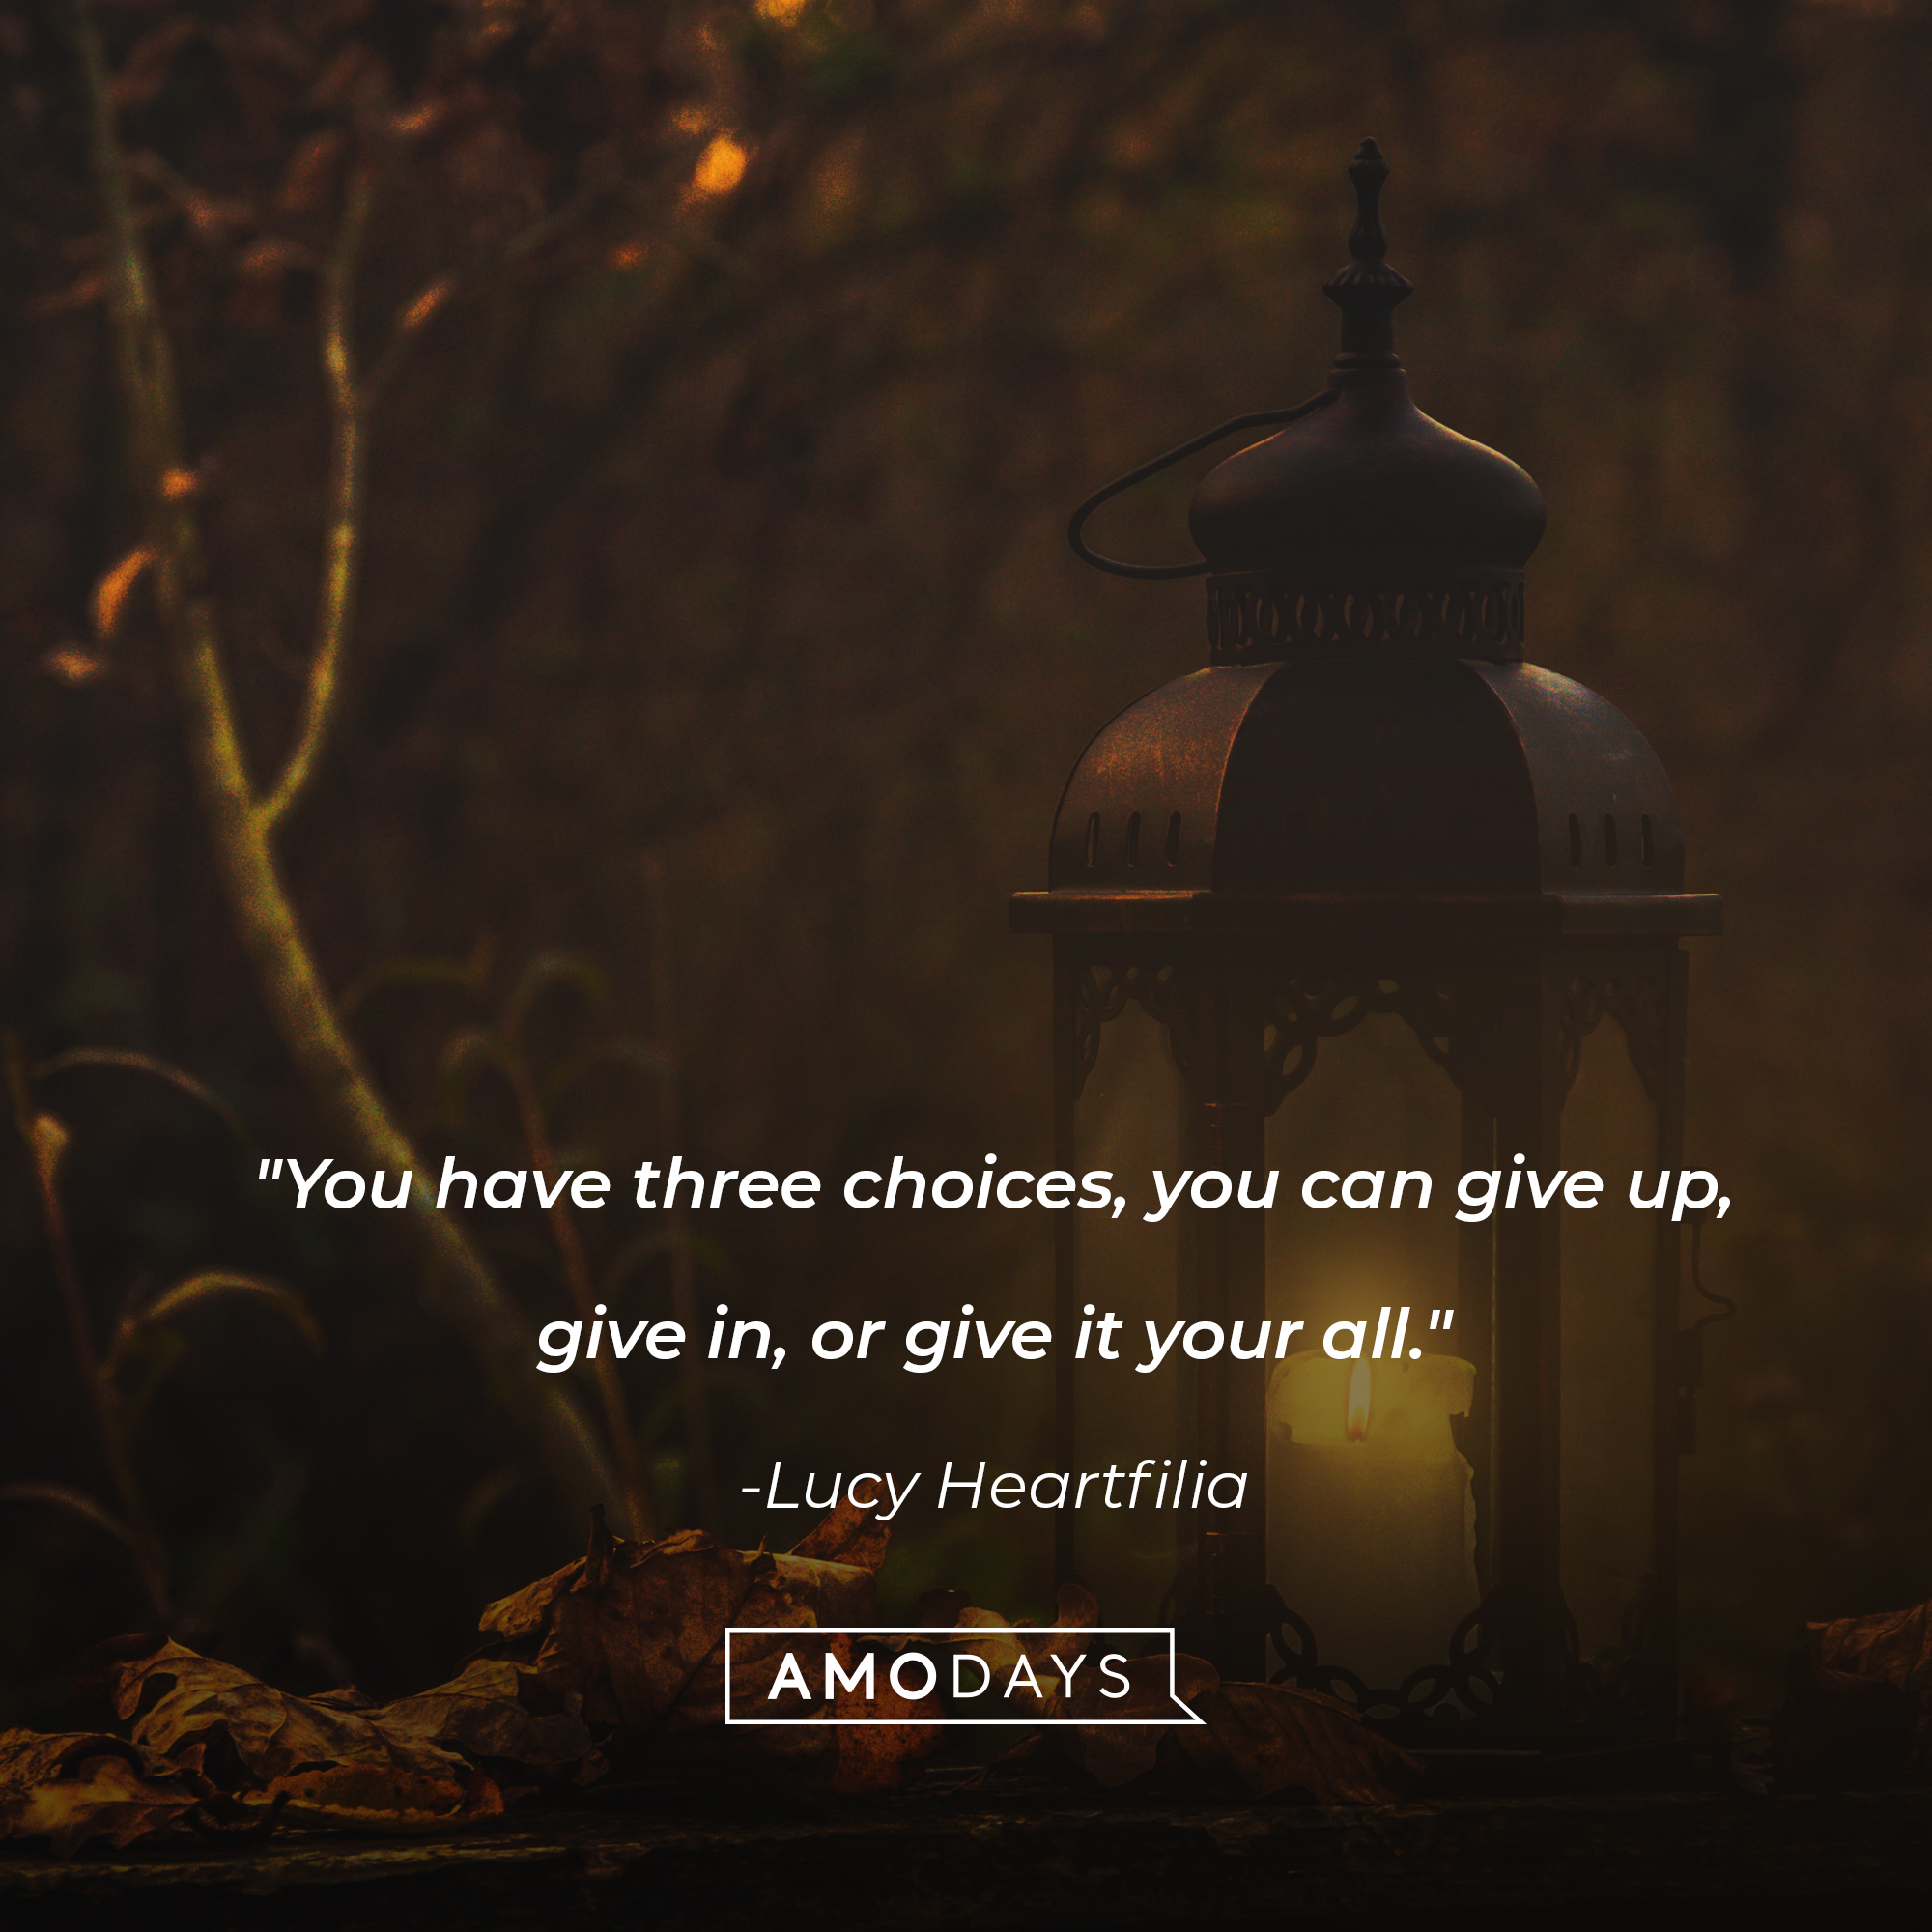 Lucy Heartfilia's quote: "You have three choices, you can give up, give in, or give it your all." | Image: Unsplash